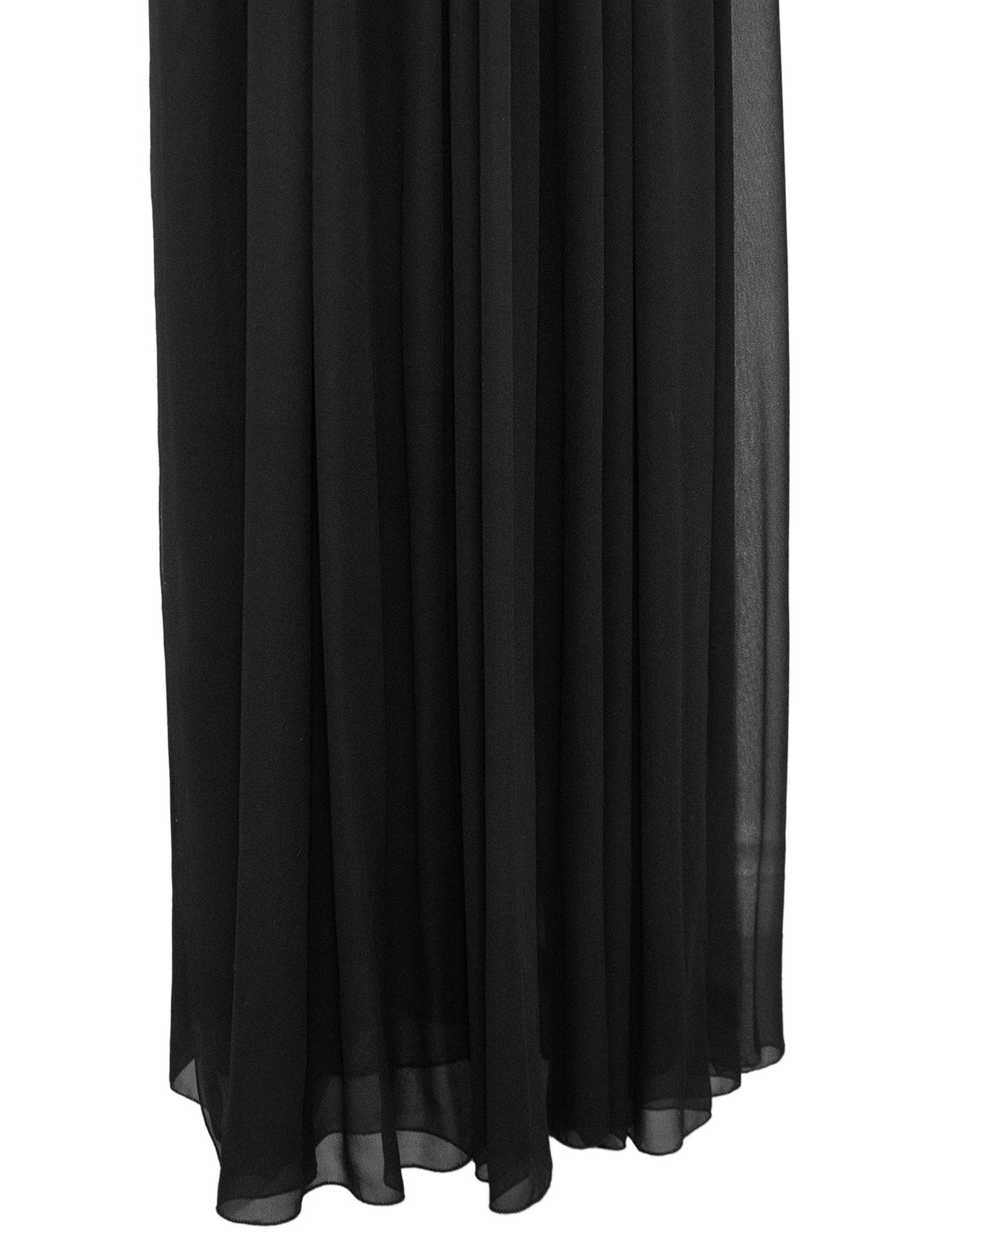 Chanel Black Chiffon Gown with Gold Chain Belt - image 11